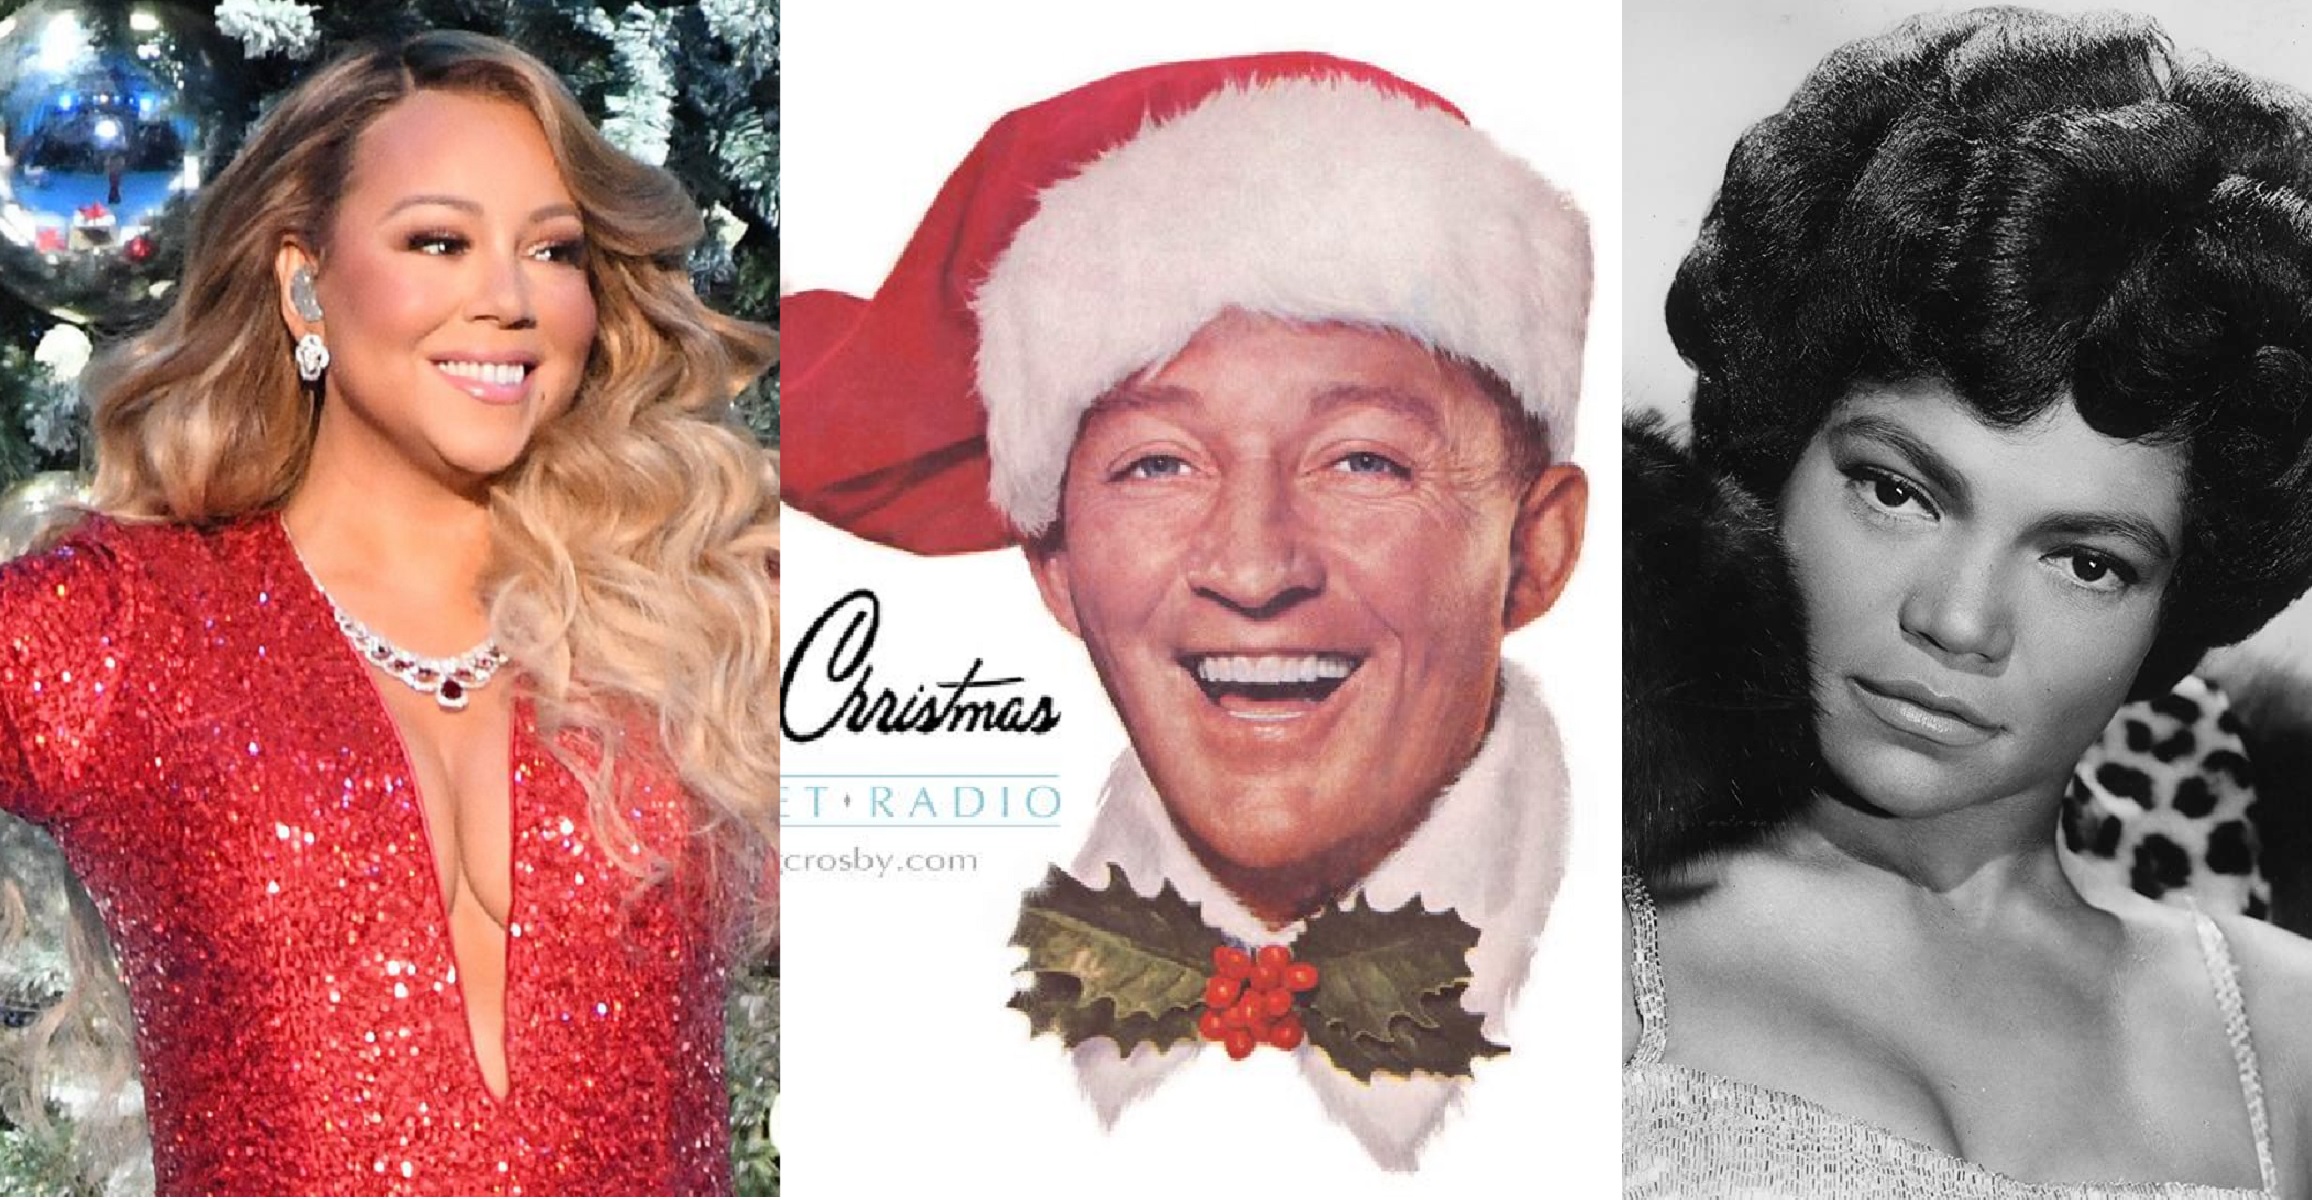 10 Christmas Songs That Are Better Than Mariah Carey’s ‘All I Want For Christmas Is You’